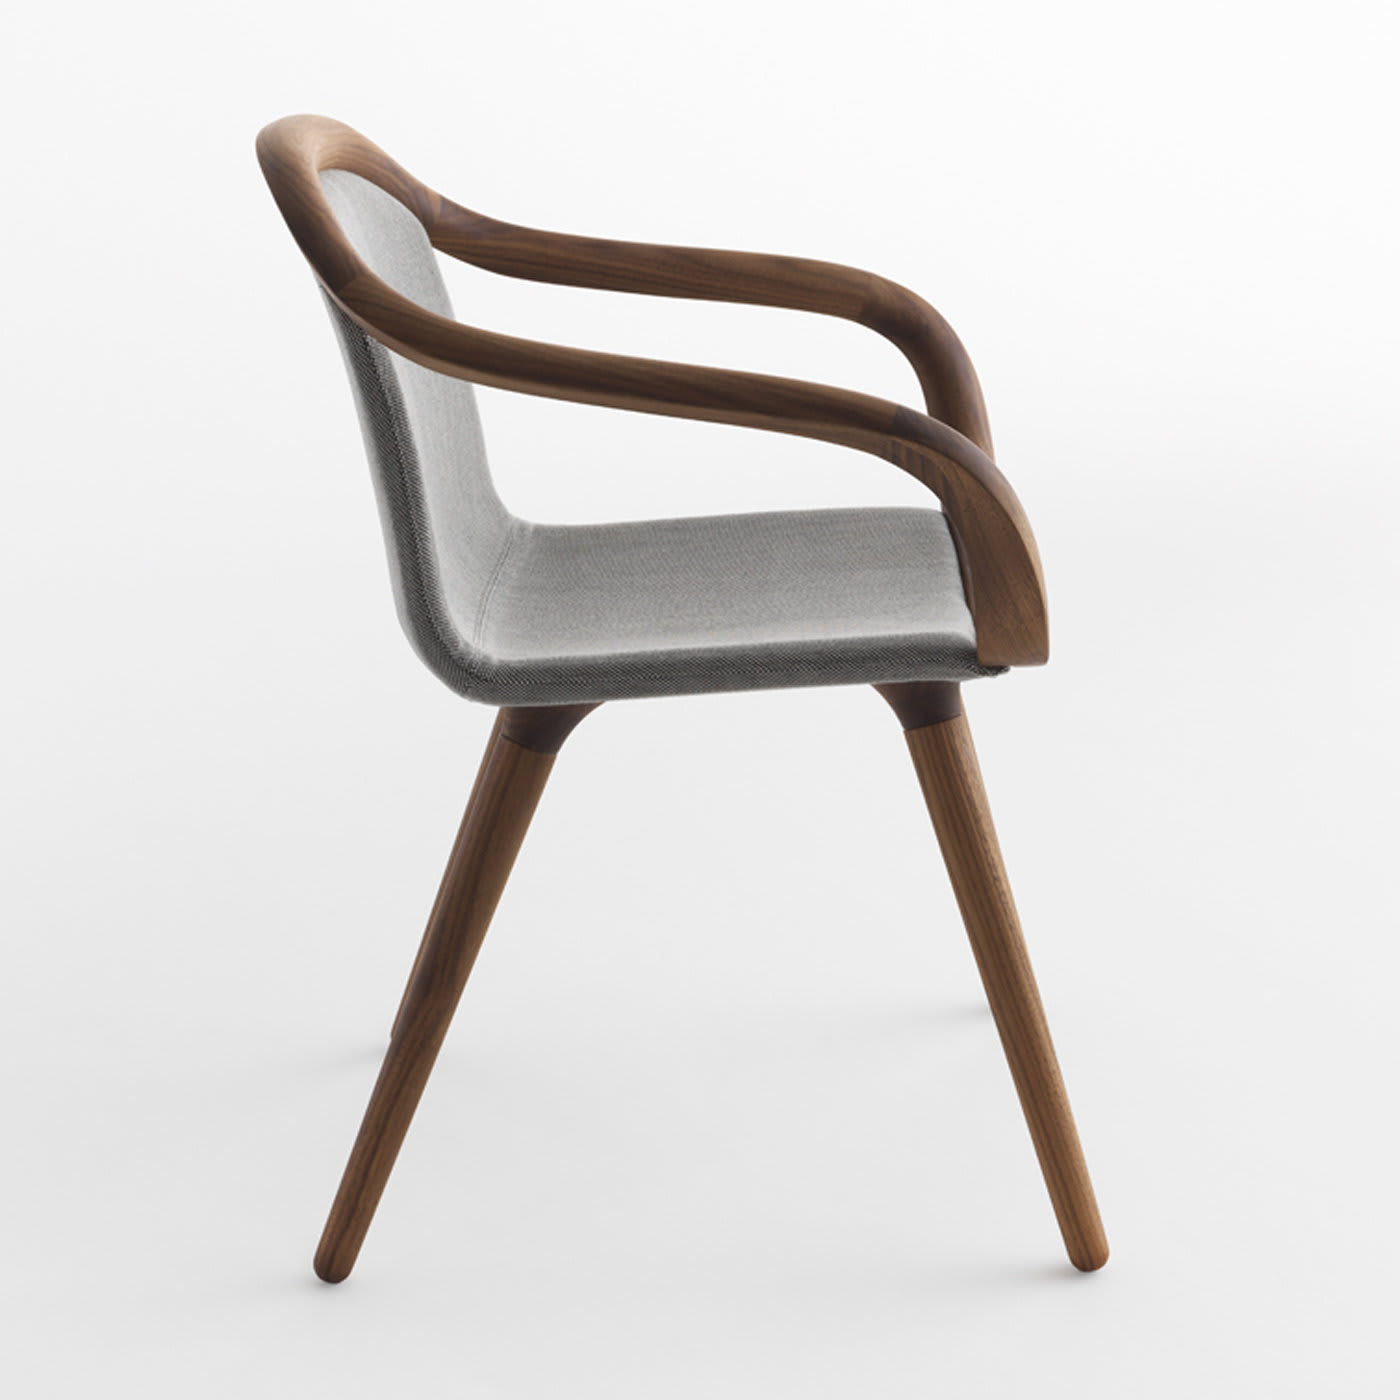 Ginevra Chair by Studio Balutto - Horm